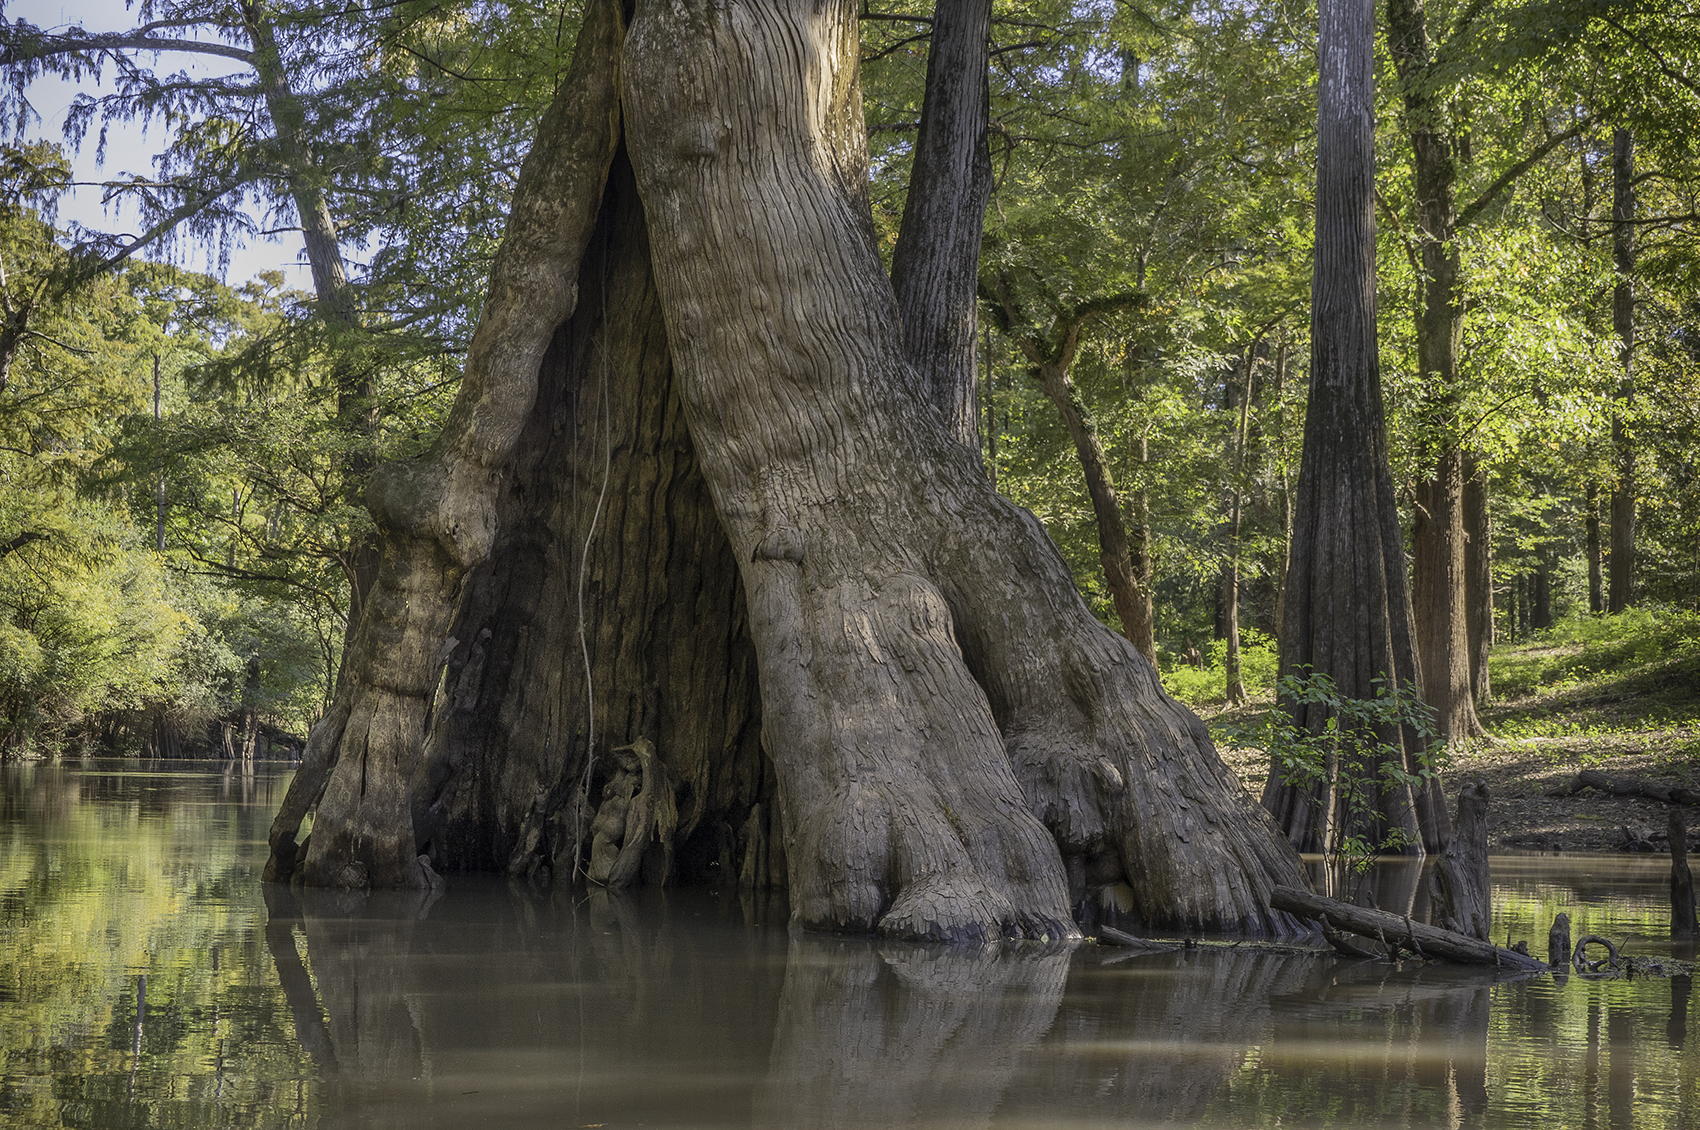 giant cypress tree with large hollow in trunk in bayou water at Chemin-a-Haut State Parkin Louisiana